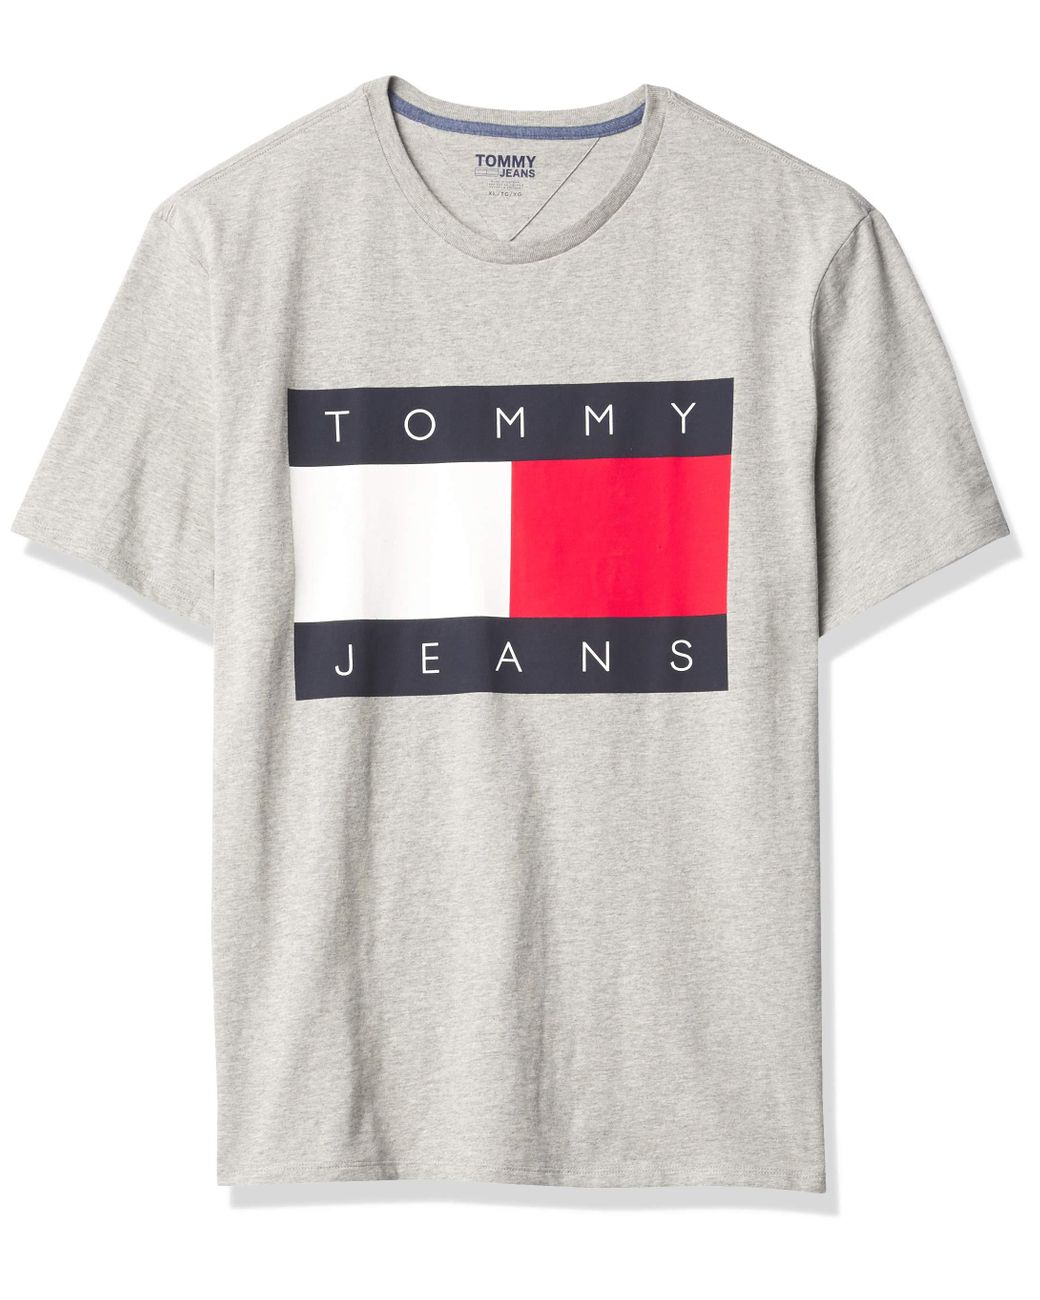 Tommy Hilfiger Denim Tommy Jeans Short Sleeve Logo T Shirt in Gray for ...